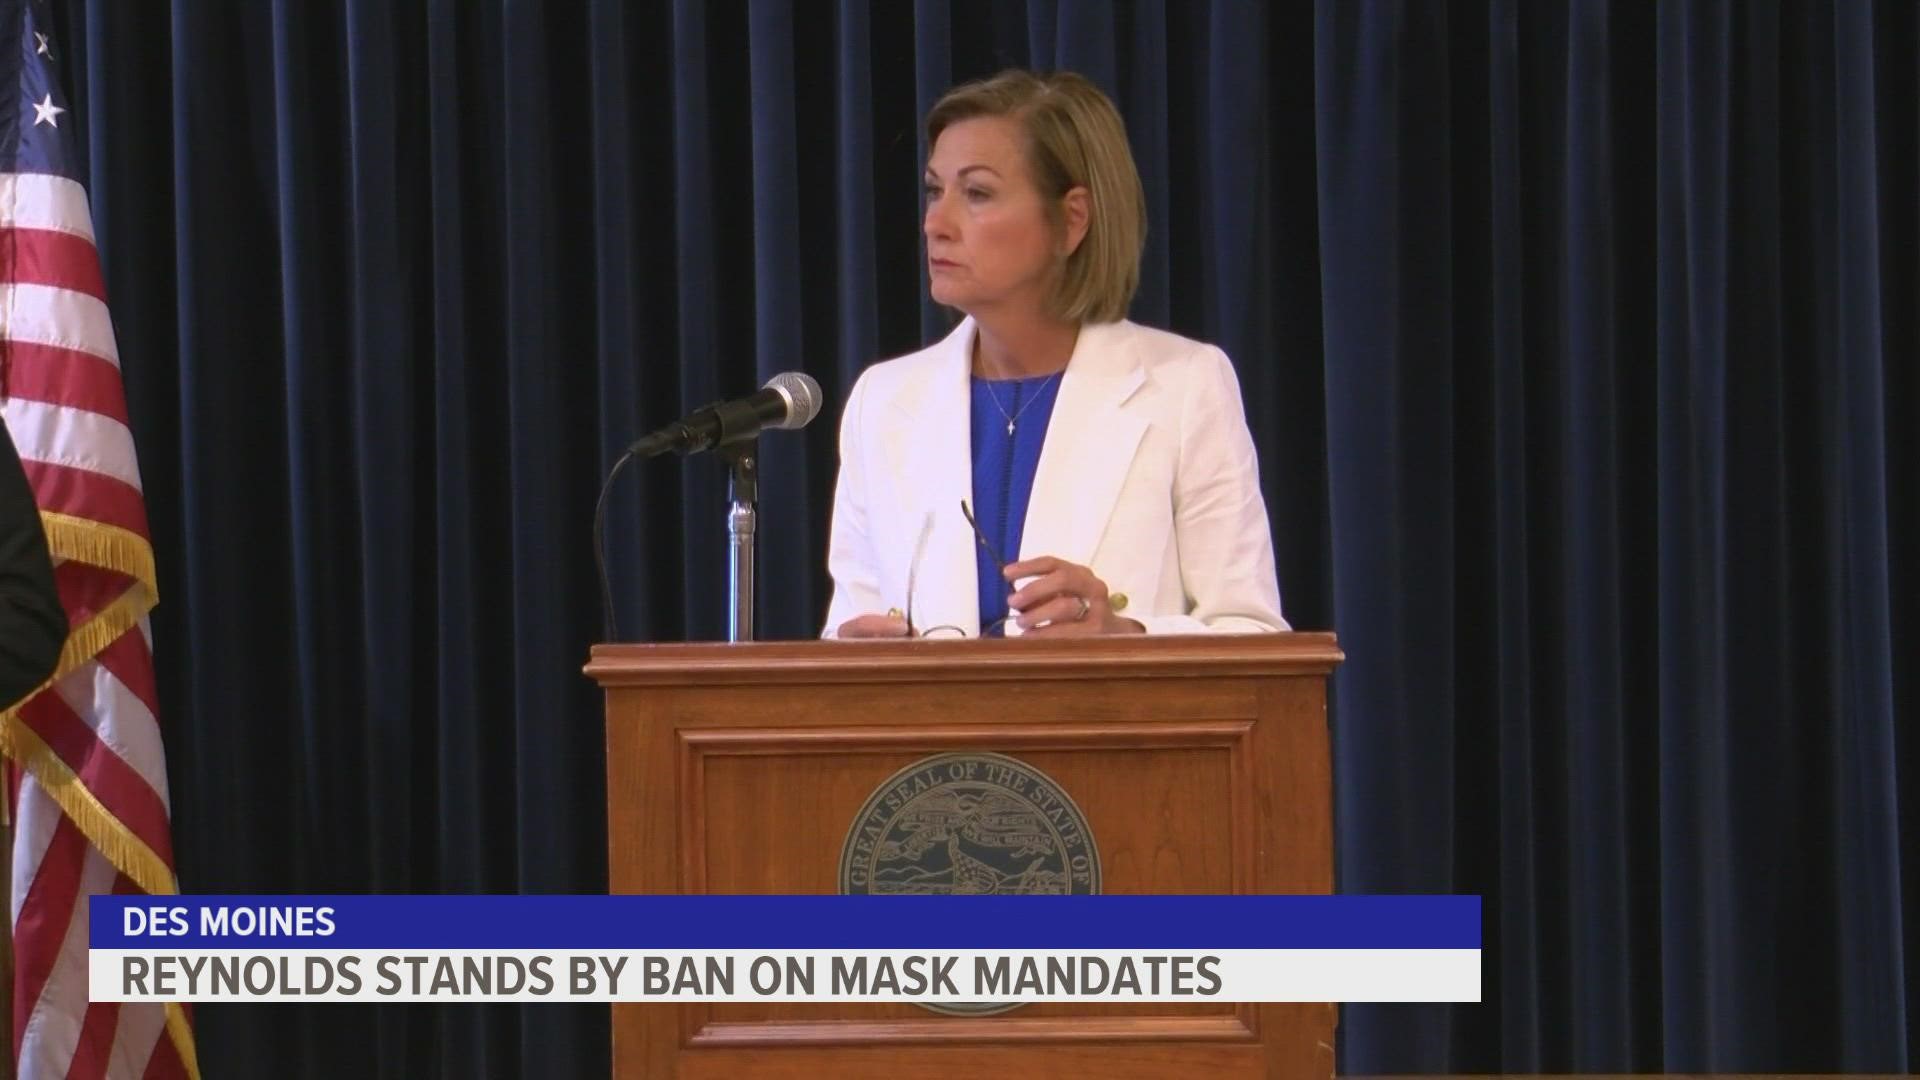 After saying there is "data" to prove wearing face masks can be harmful to children, Reynolds' office was unable to share scientific studies to support claim.